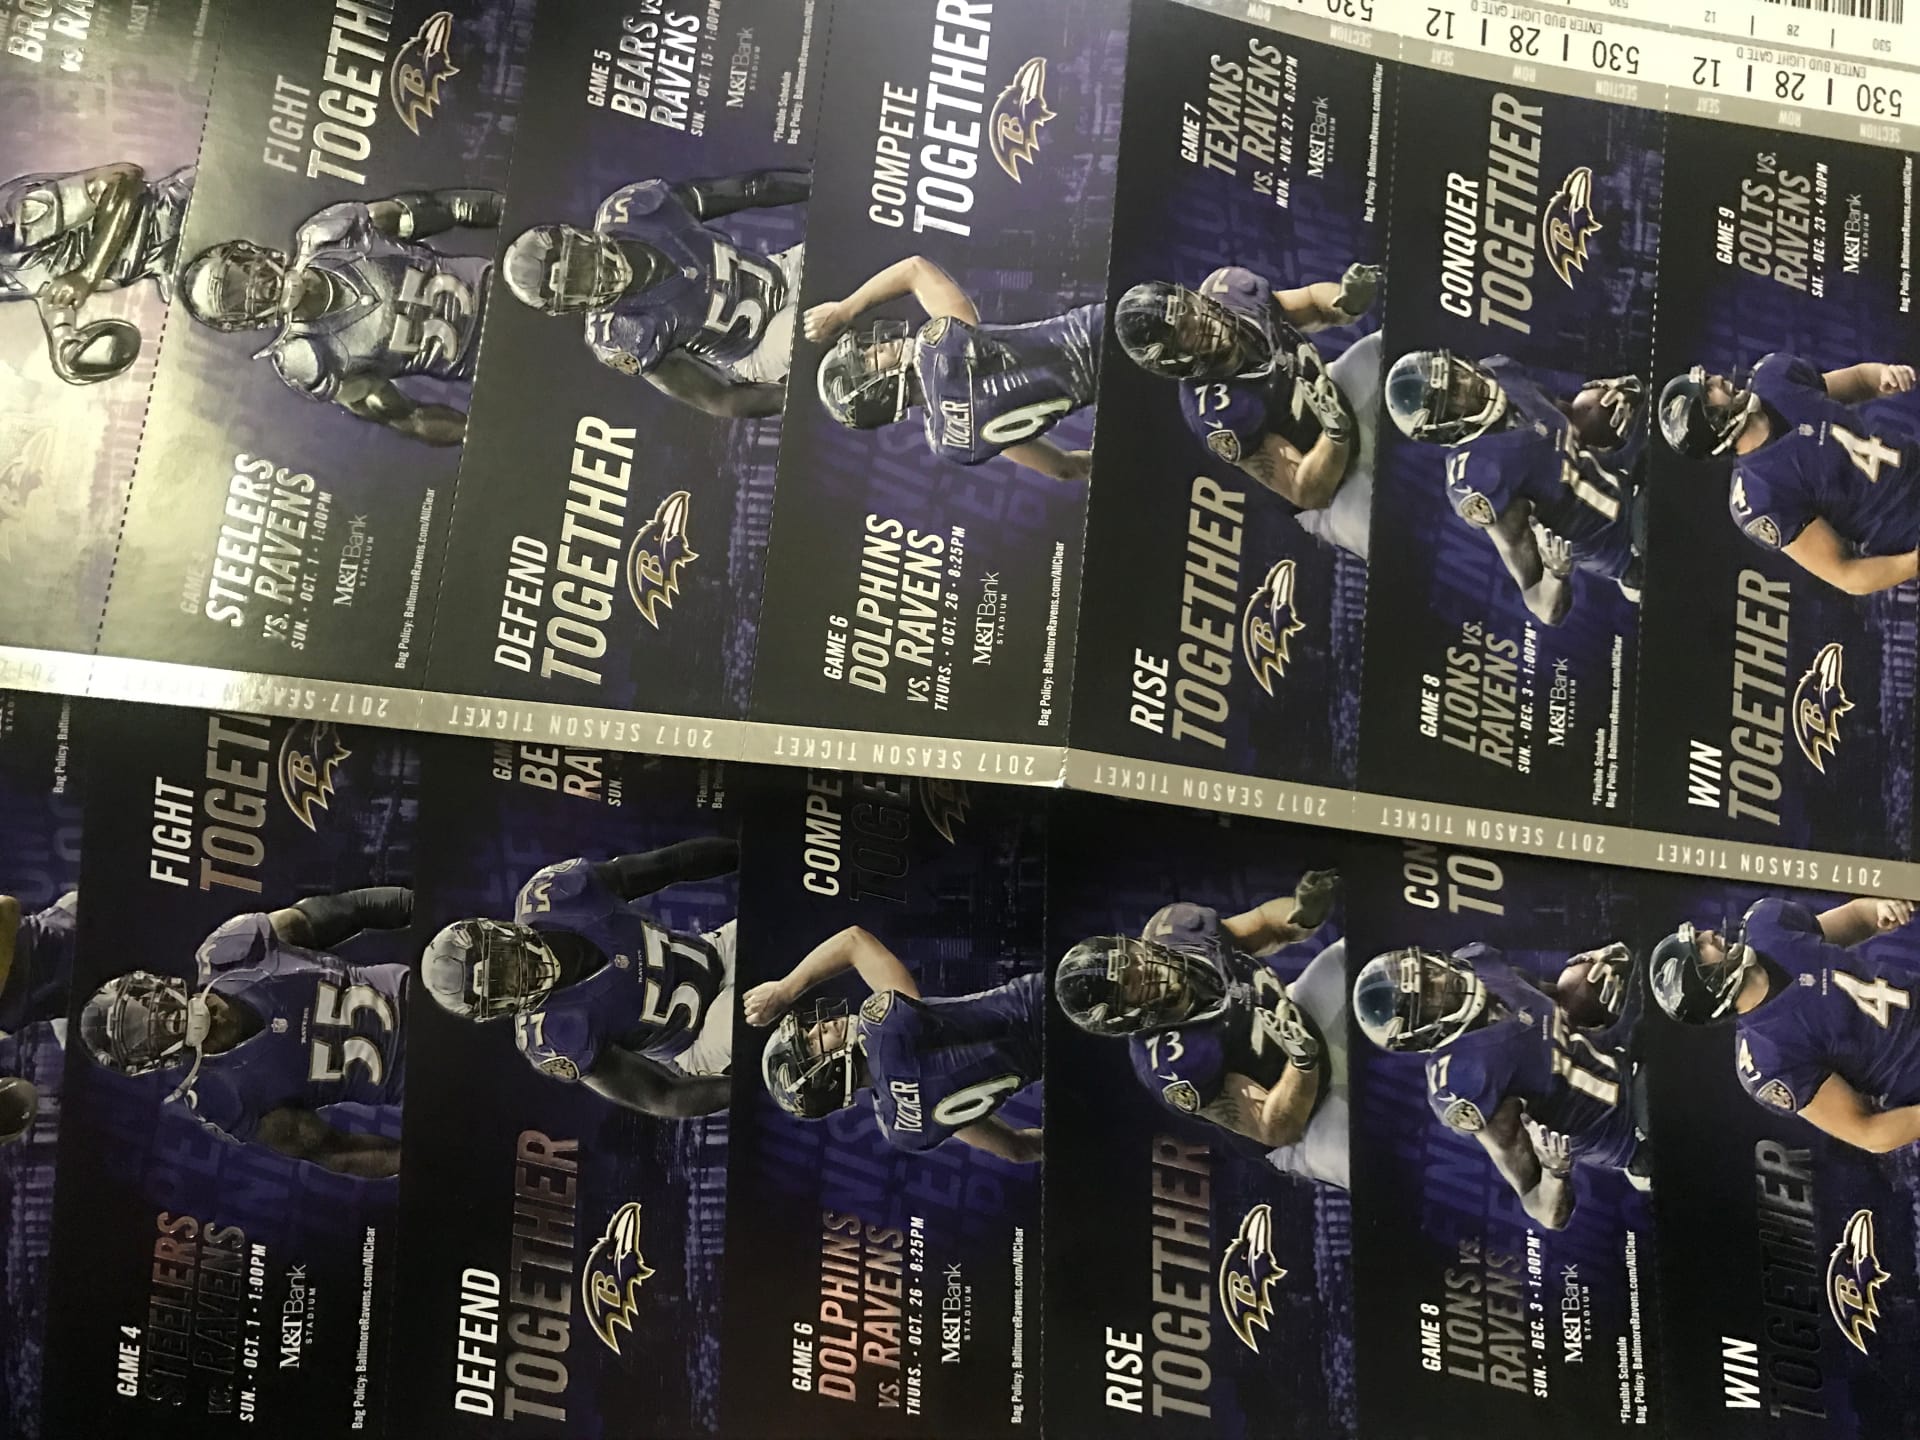 Win a Pair of Ravens Tickets!